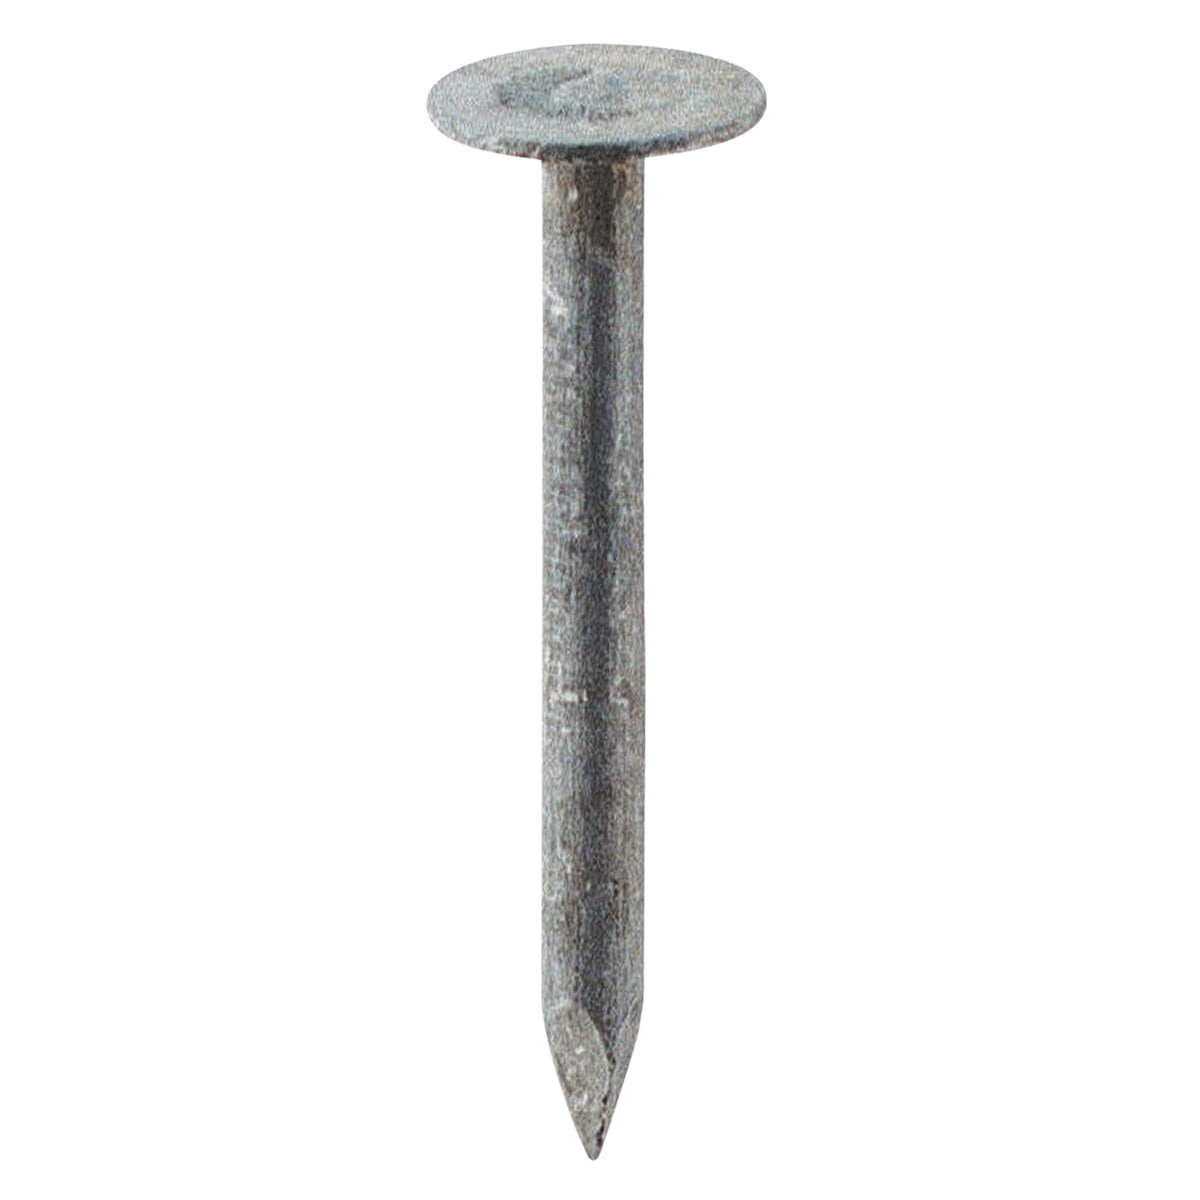 GripRite 2 in. Electo Galvanized Roofing Nails (50 lb.pack)